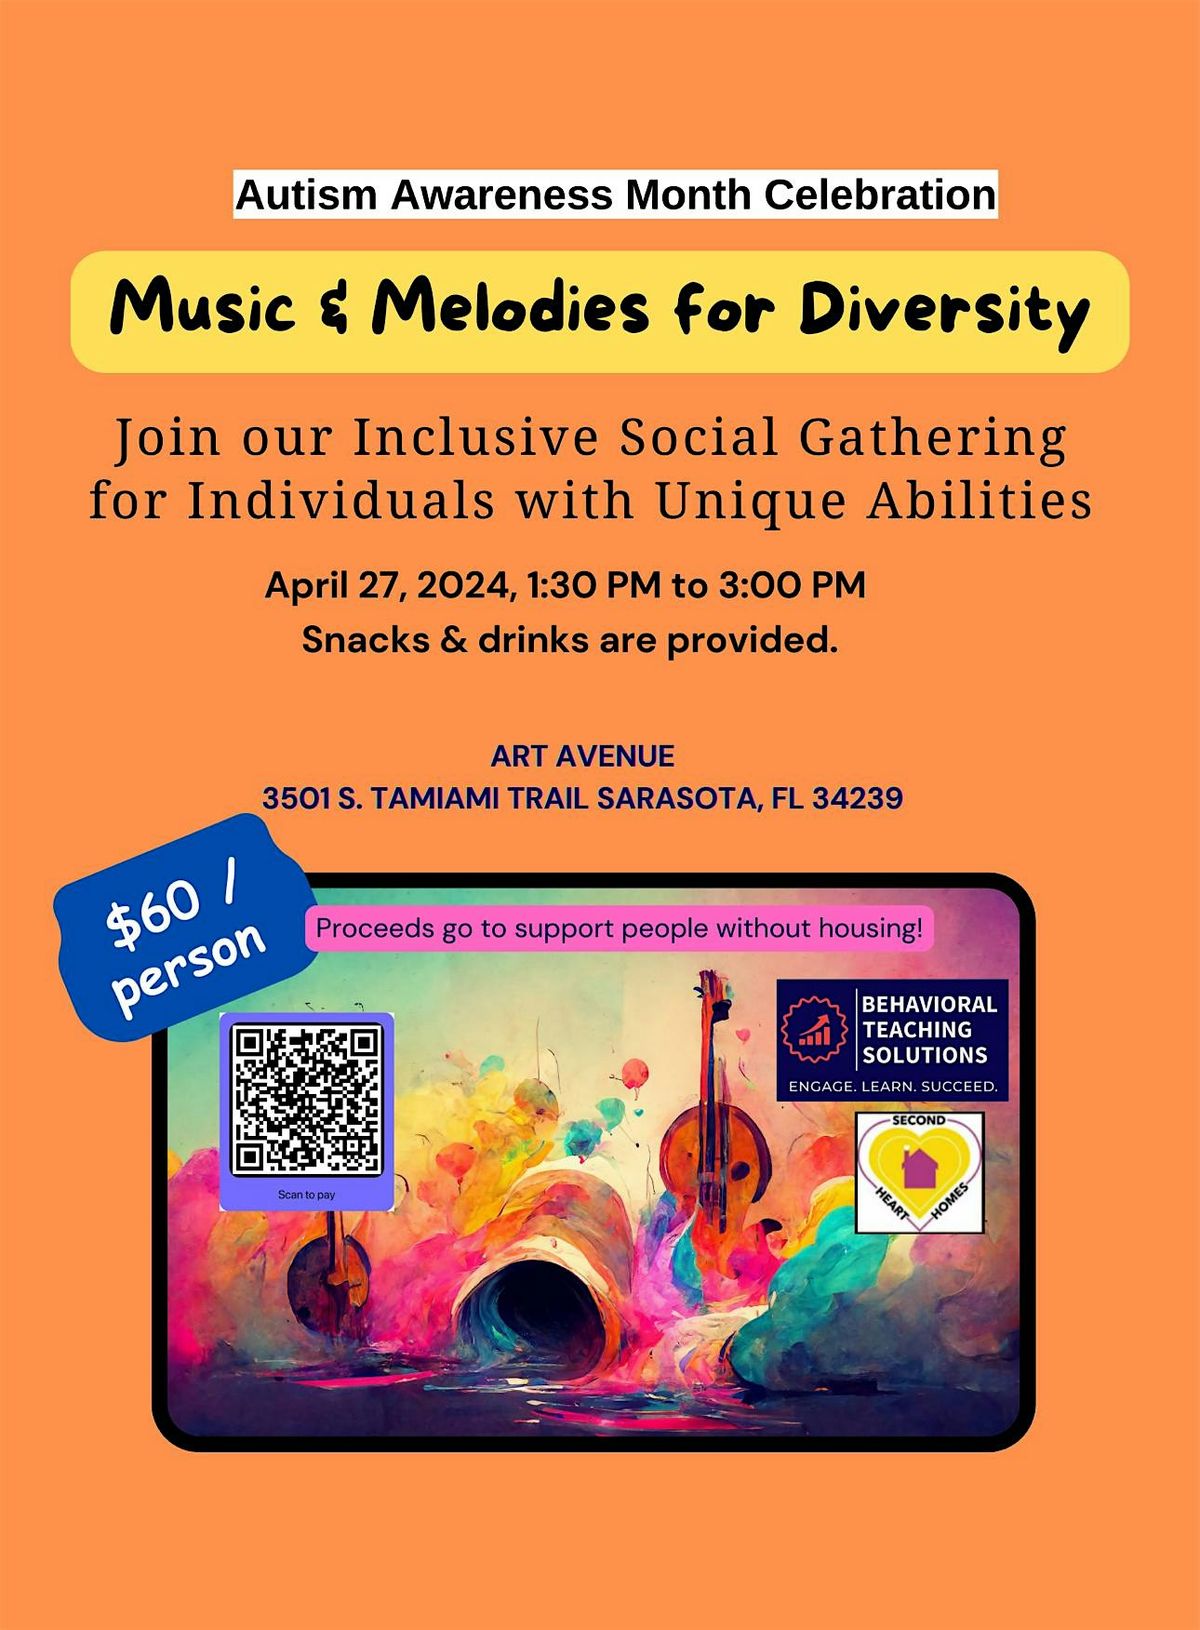 Music & Melodies for Diversity: An Autism Awareness Social Gathering